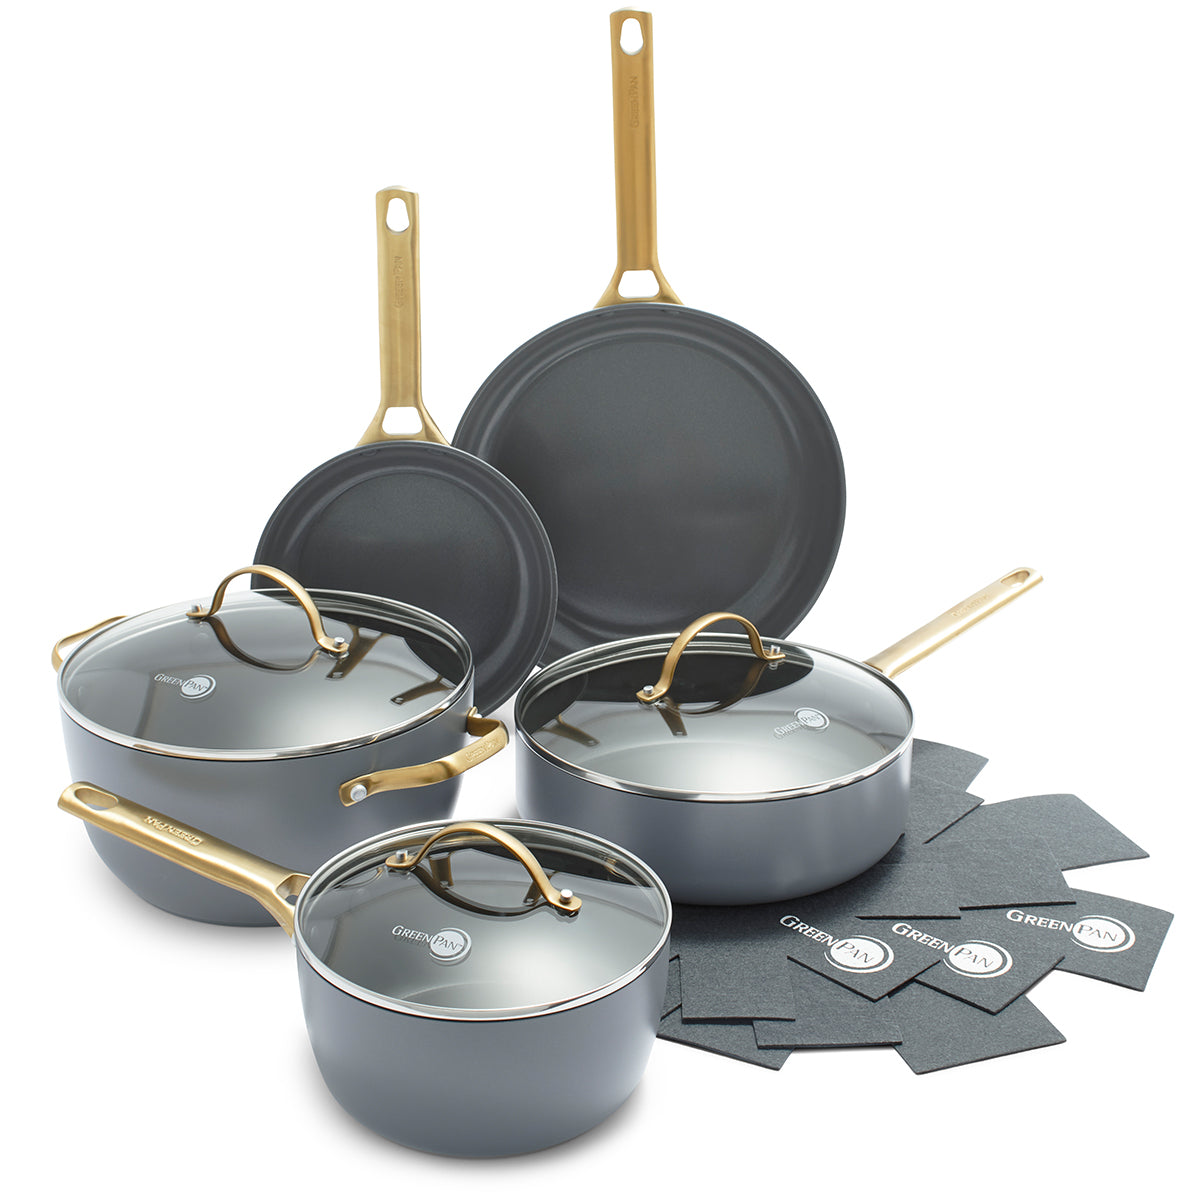 Reserve Ceramic Nonstick 11-Piece Cookware Set | Charcoal with Gold-Tone Handles